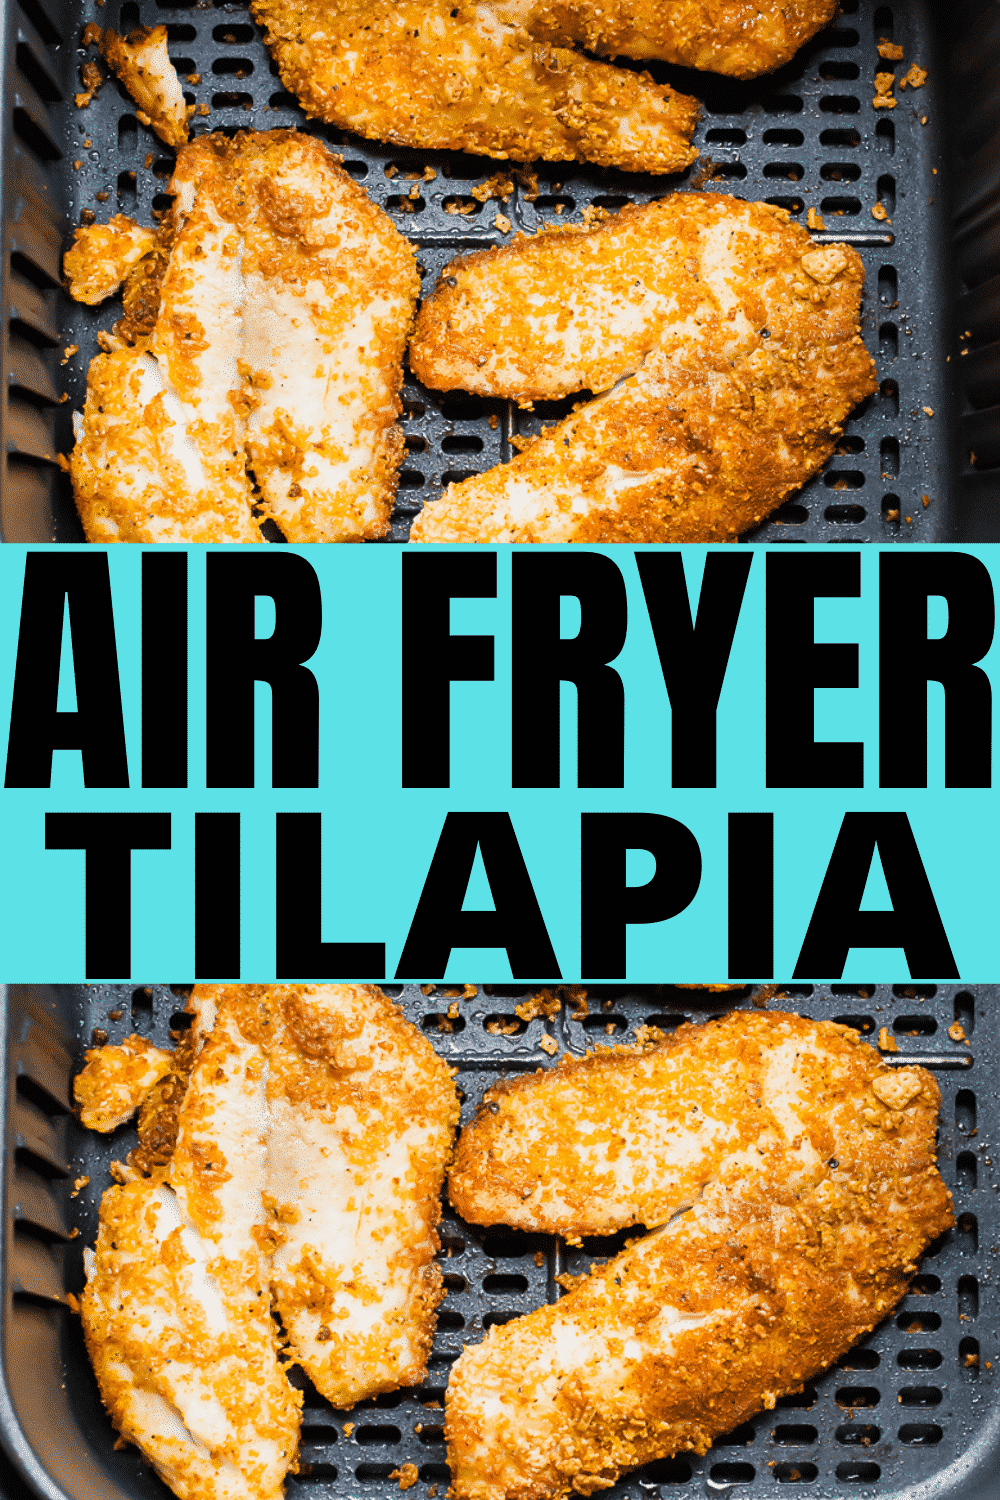 Air Fryer Tilapia is so fast and flaky! Coat this yummy white fish in seasoned breadcrumbs for a quick fish dinner with pantry staples. #airfryertilapia #airfryerfish #tilapia via @vegetarianmamma